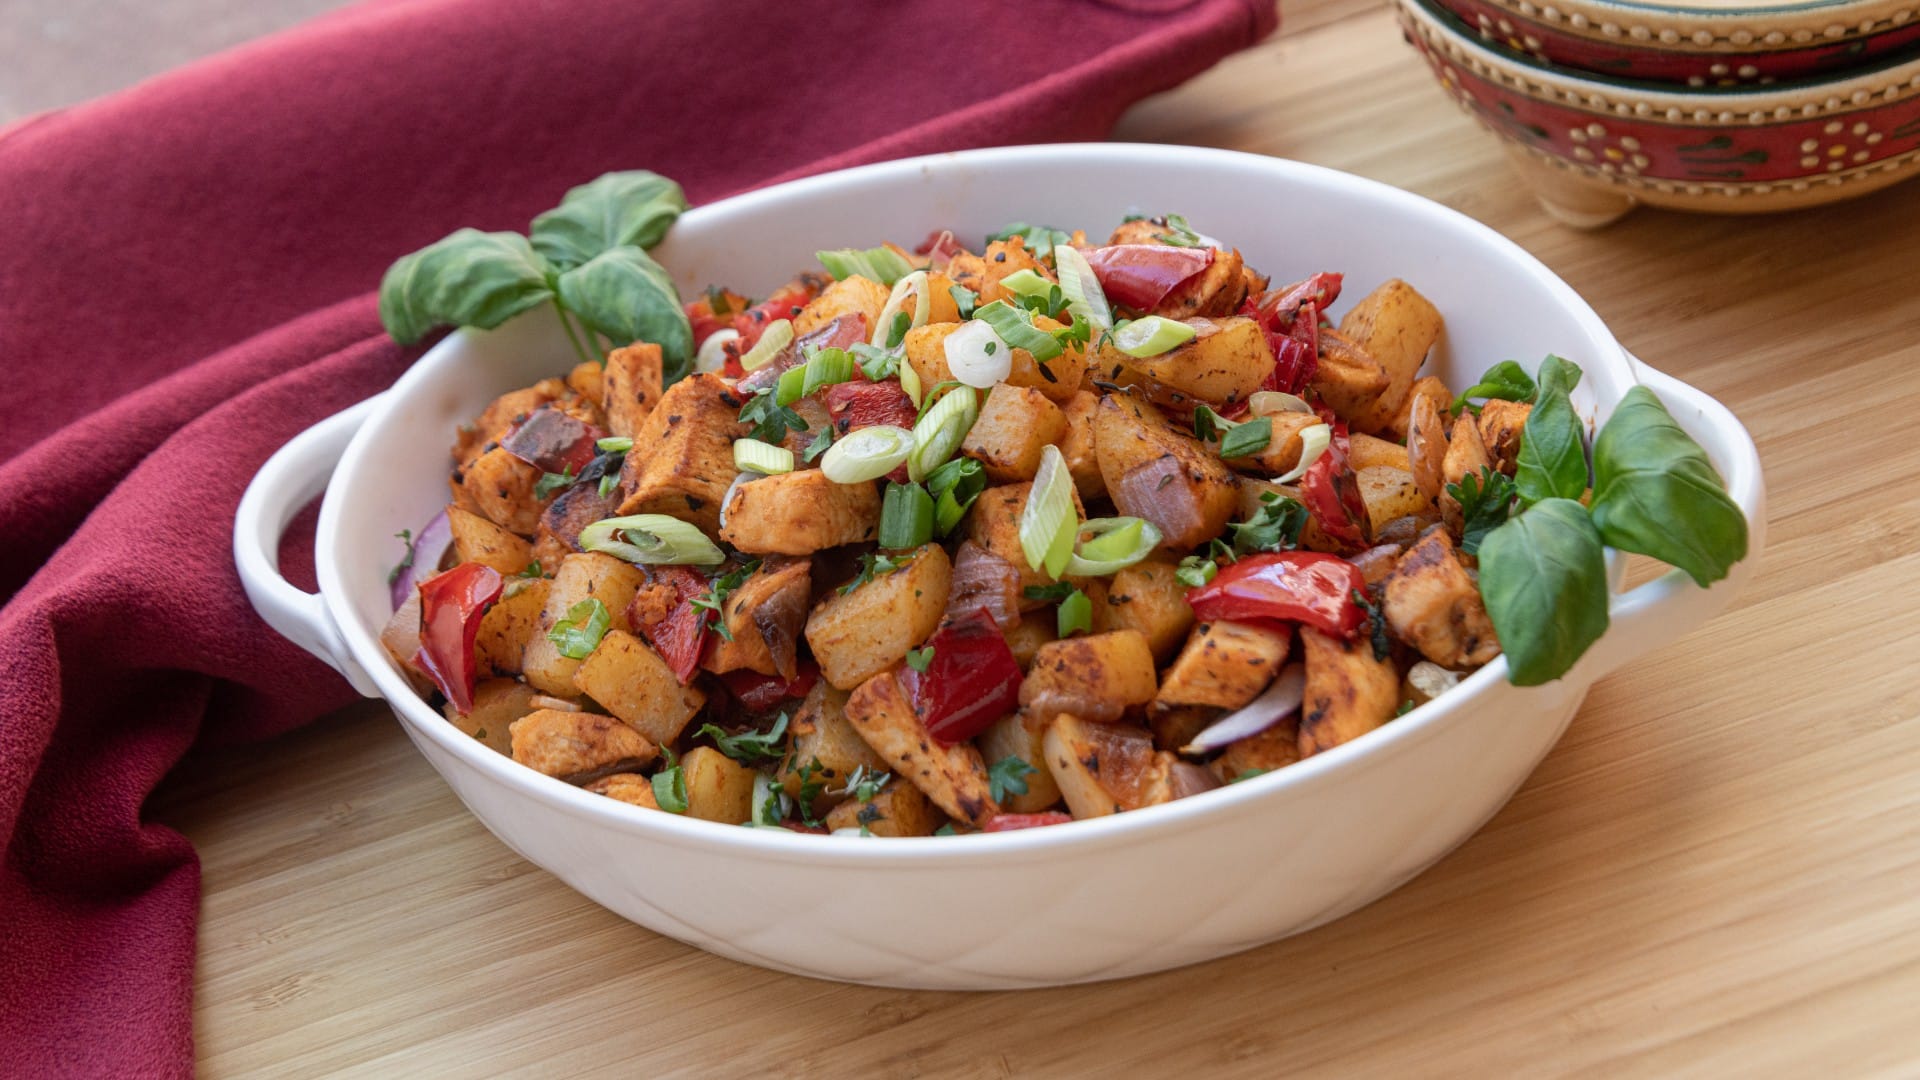 White serving bowl of Sweet Basil Chicken Hash including diced chicken, potatoes, red peppers, red onions, green onions, parsley and sweet basil